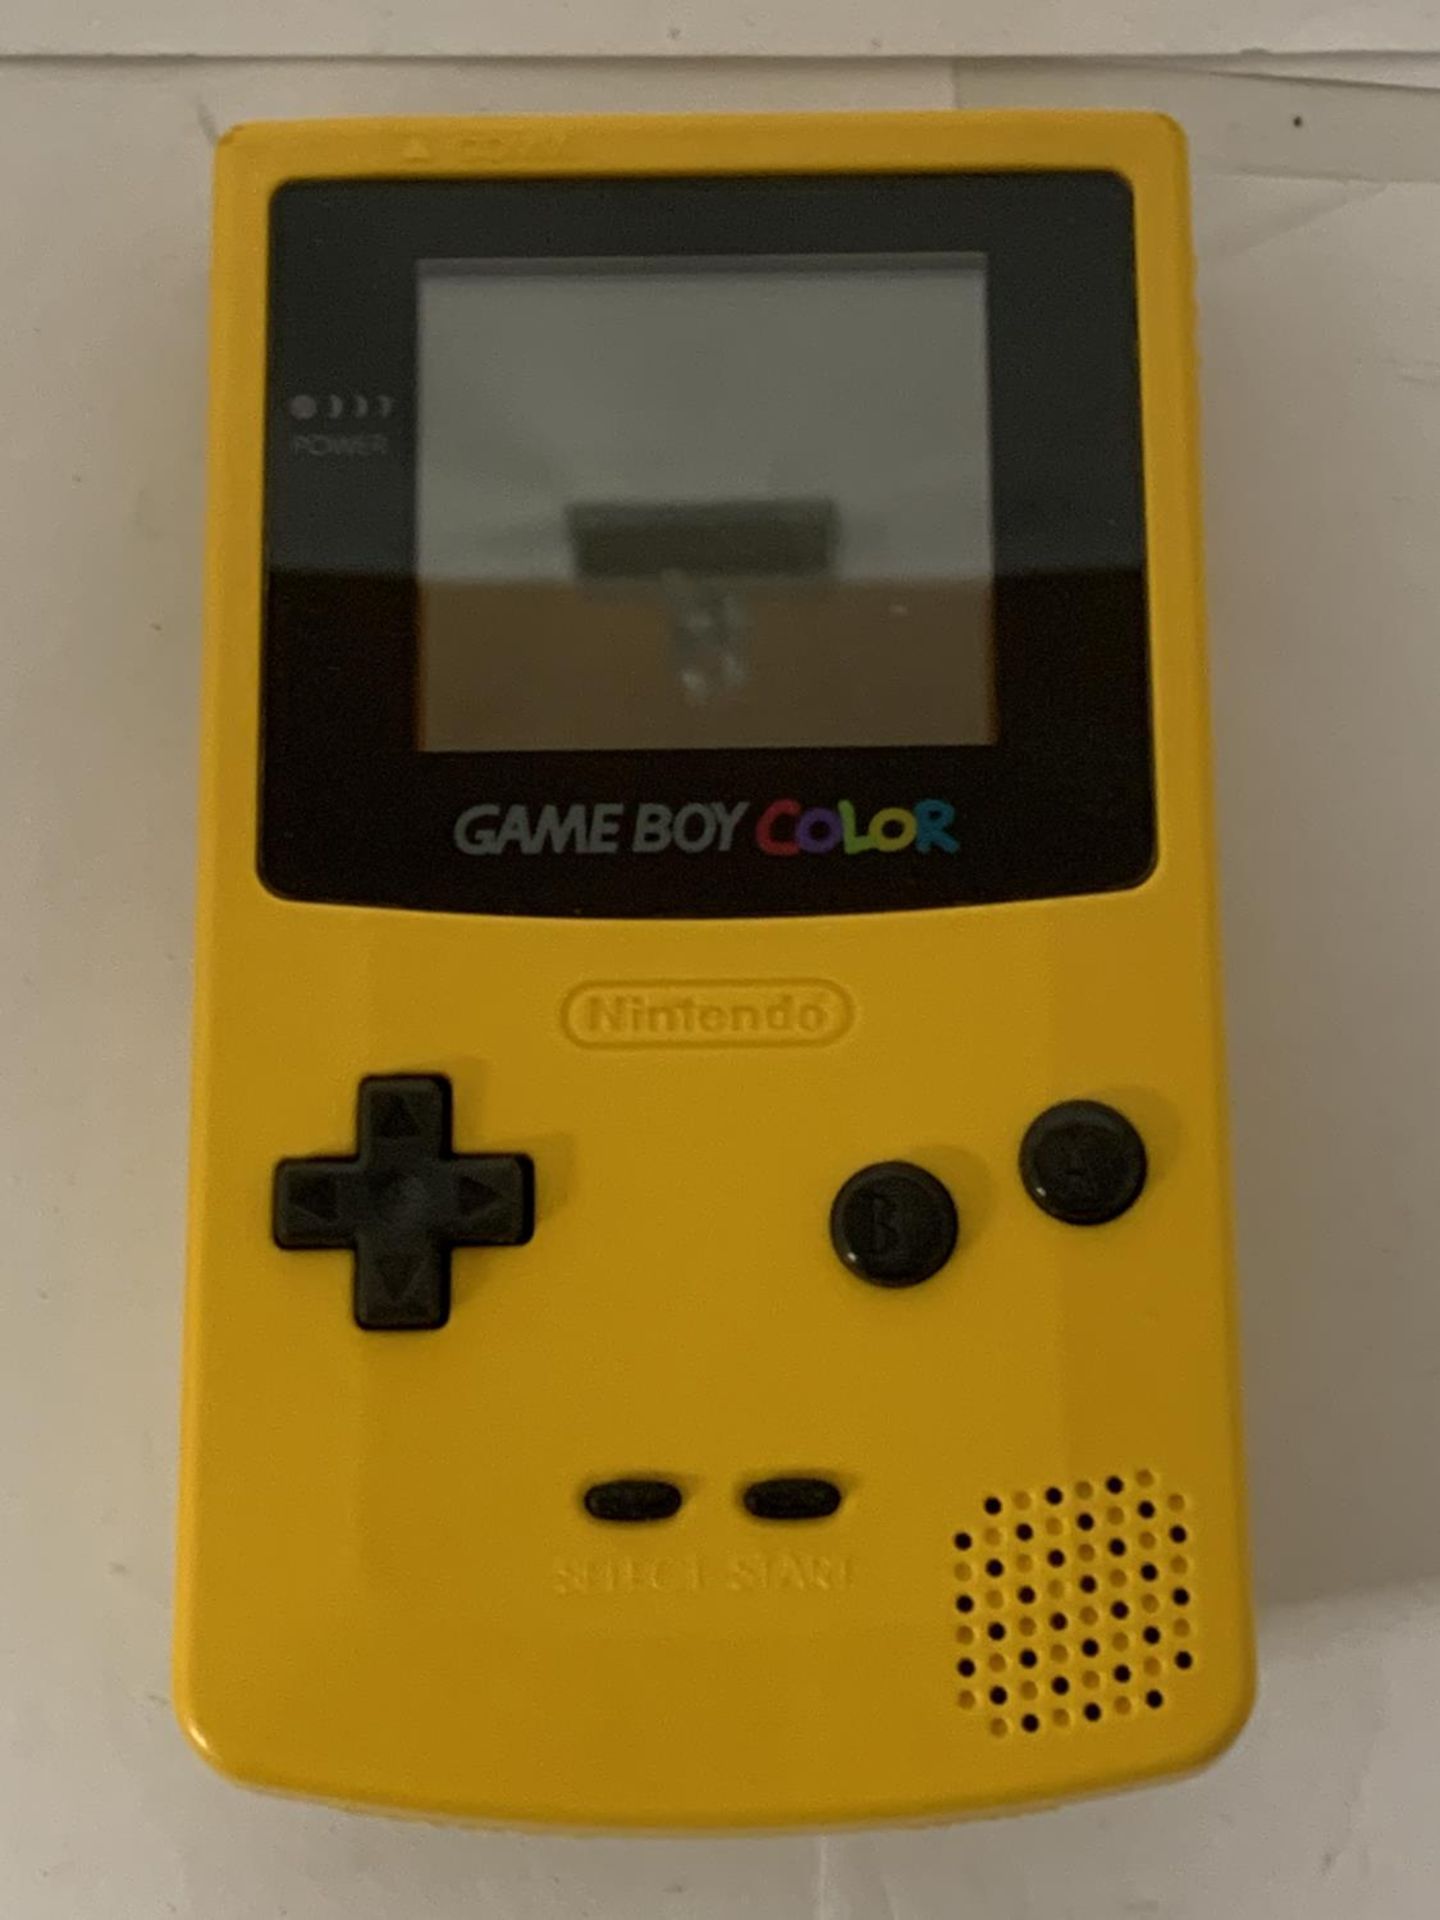 A BOXED GAMEBOY COLOR PORTABLE HANDHELD - Image 2 of 4